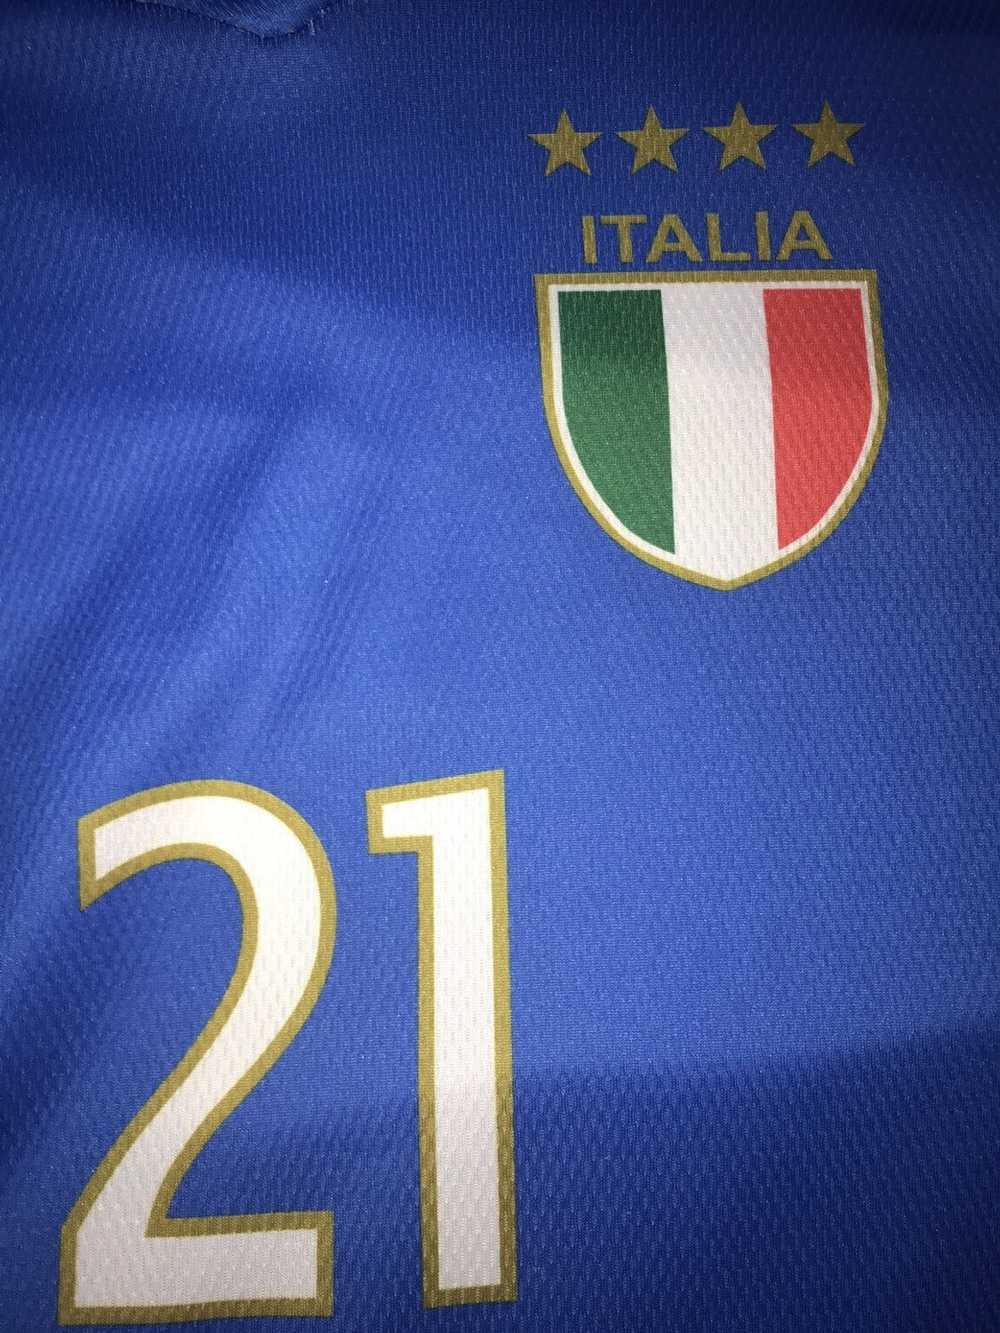 Soccer Jersey Italy soccer jersey - image 2